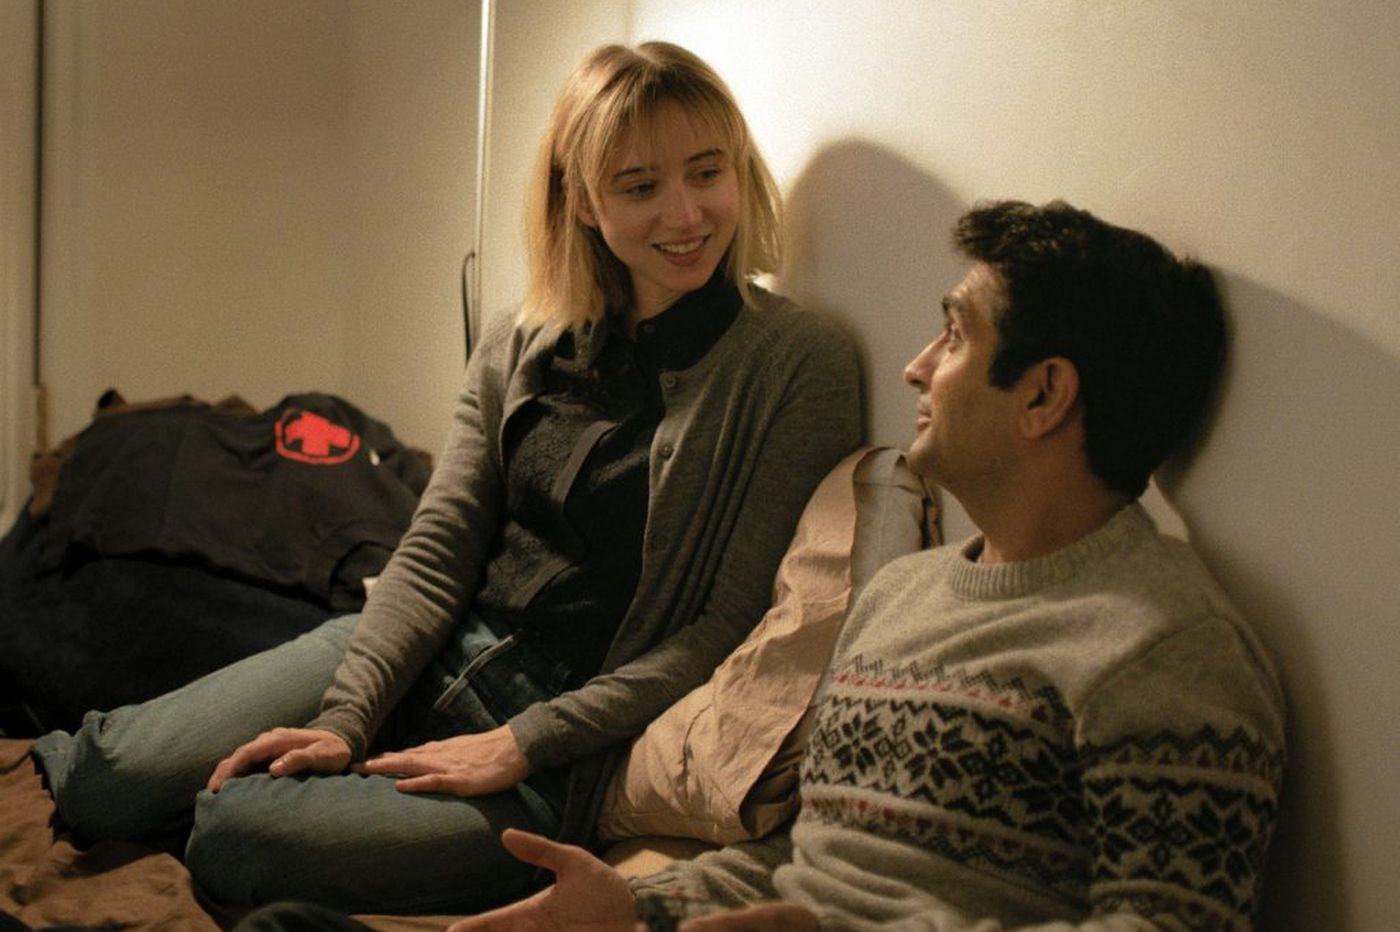 The Big Sick': Finally, Hollywood gets a comedy right